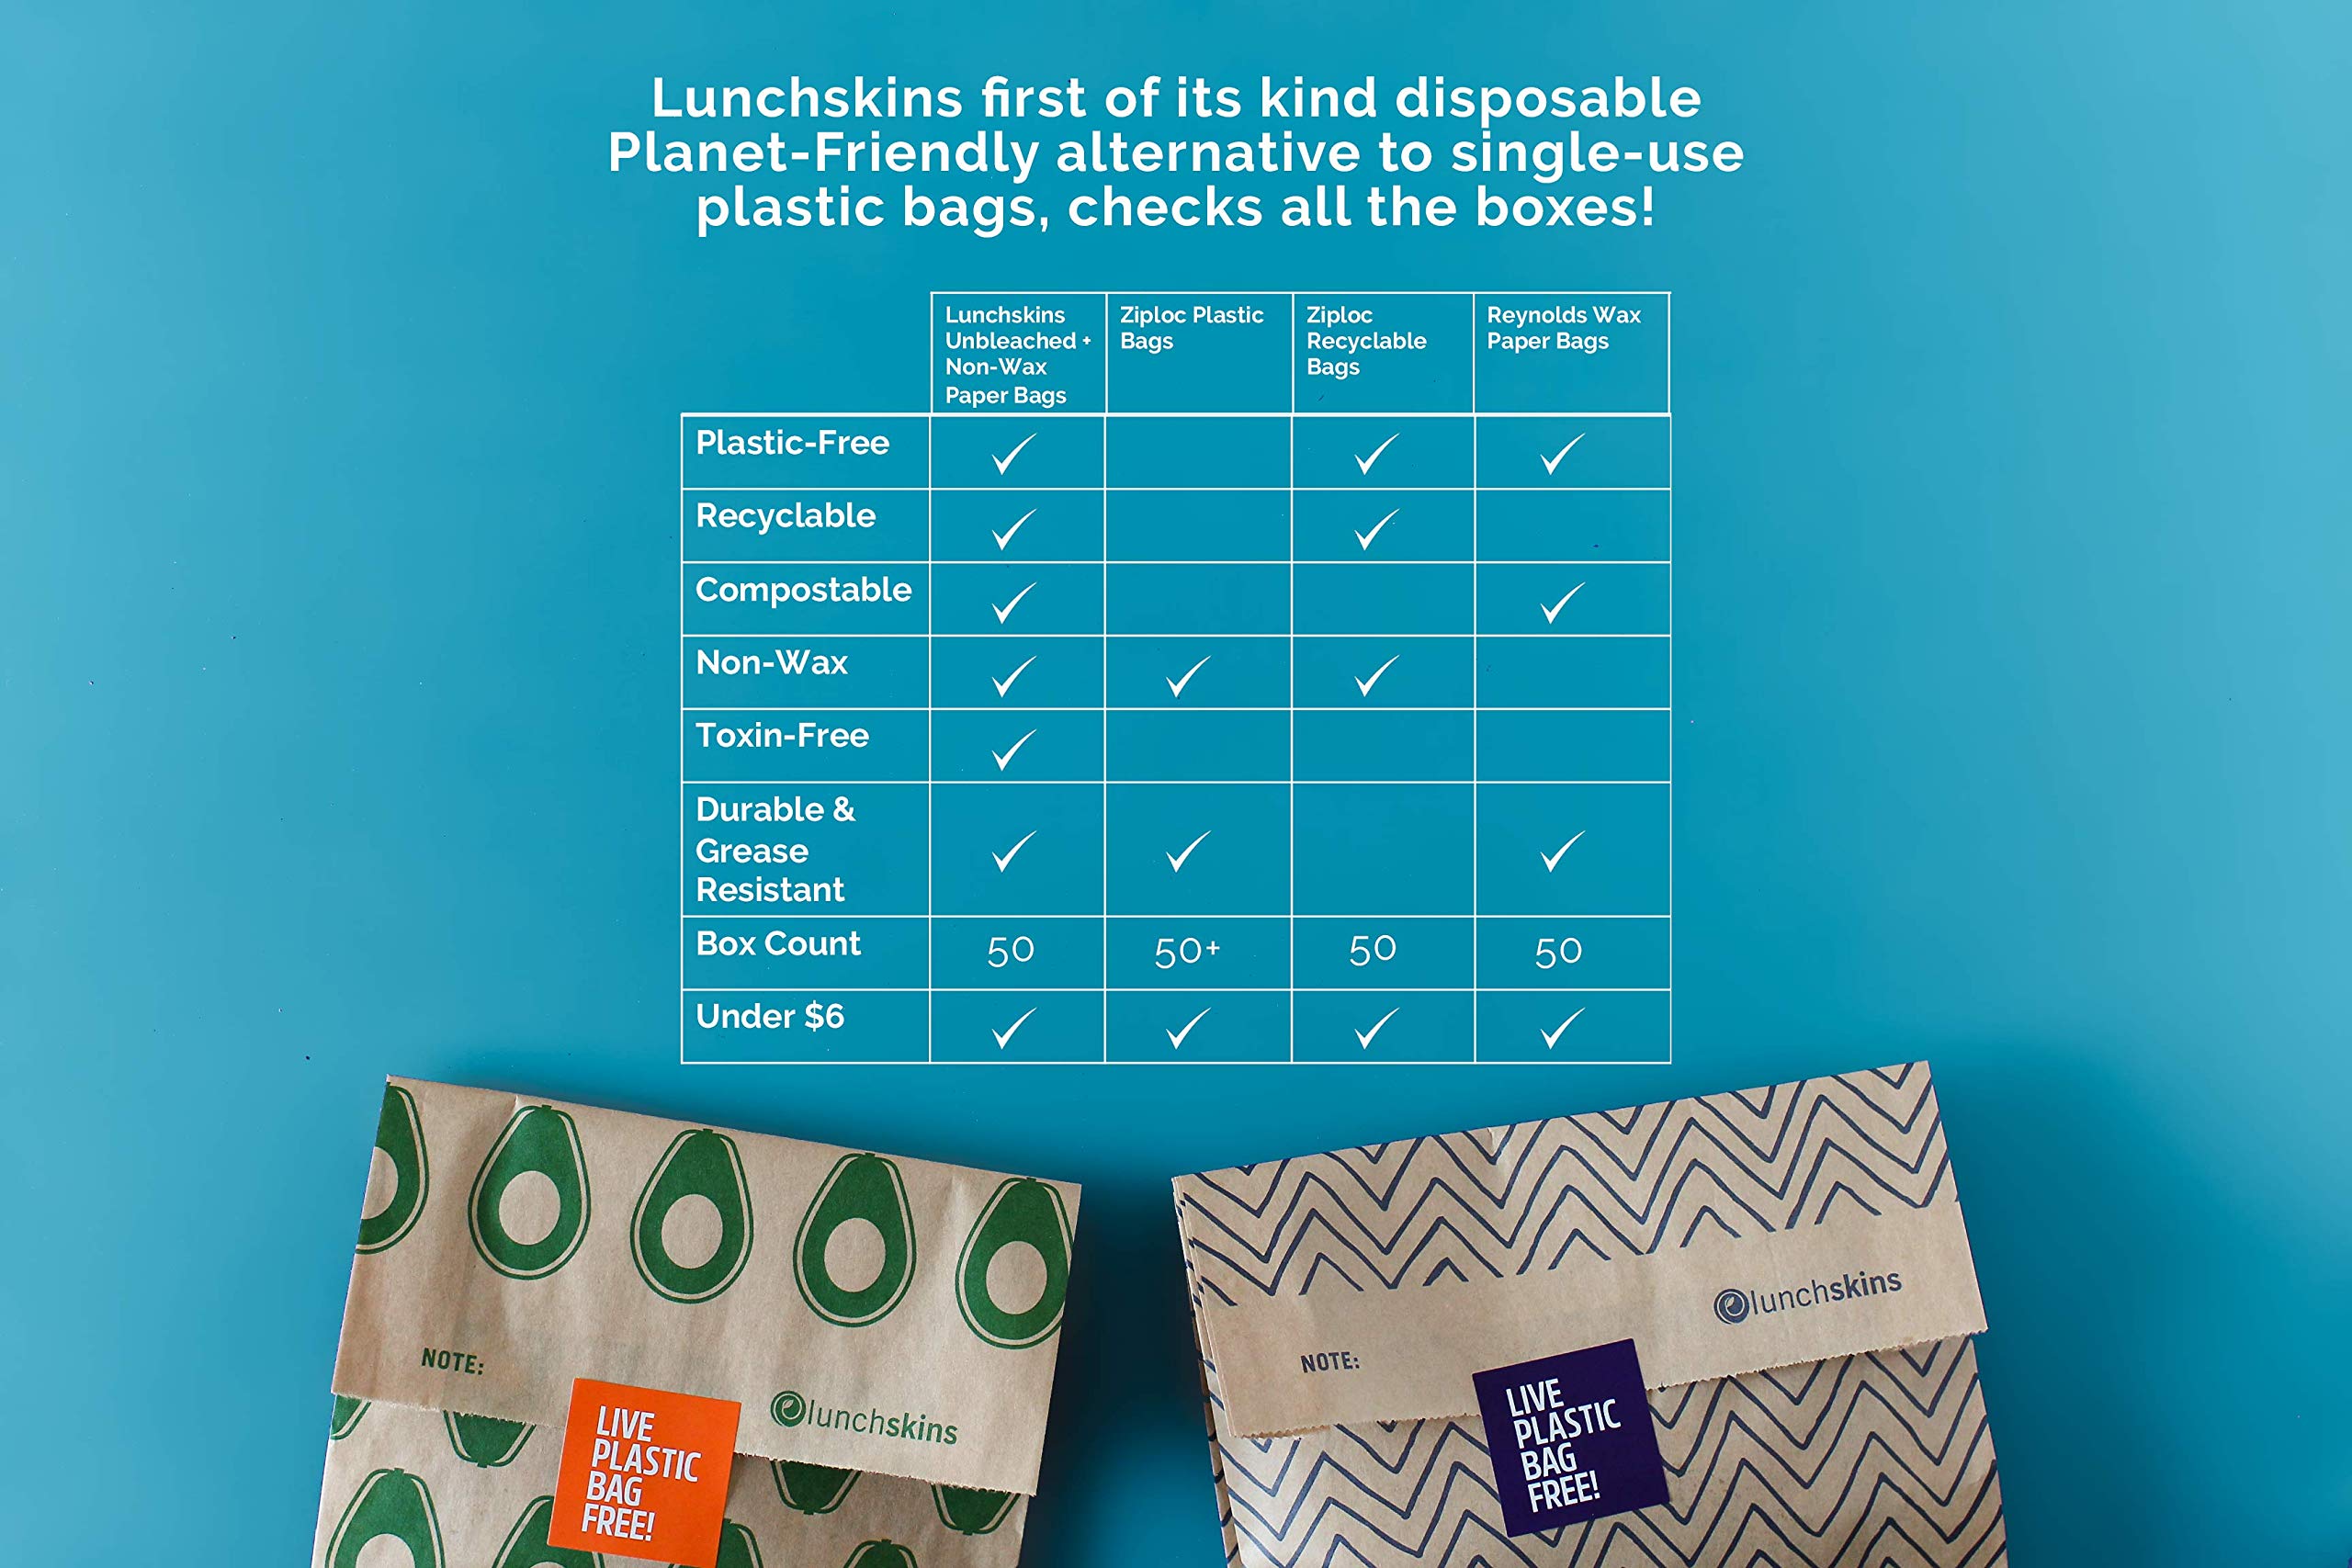 LunchSkins Compostable + Unbleached + Non-Wax Paper Sandwich Bags with 60 Fun Stickers Included - 50ct Box Green Avocado (KB-50-SAND-AVOCADO)